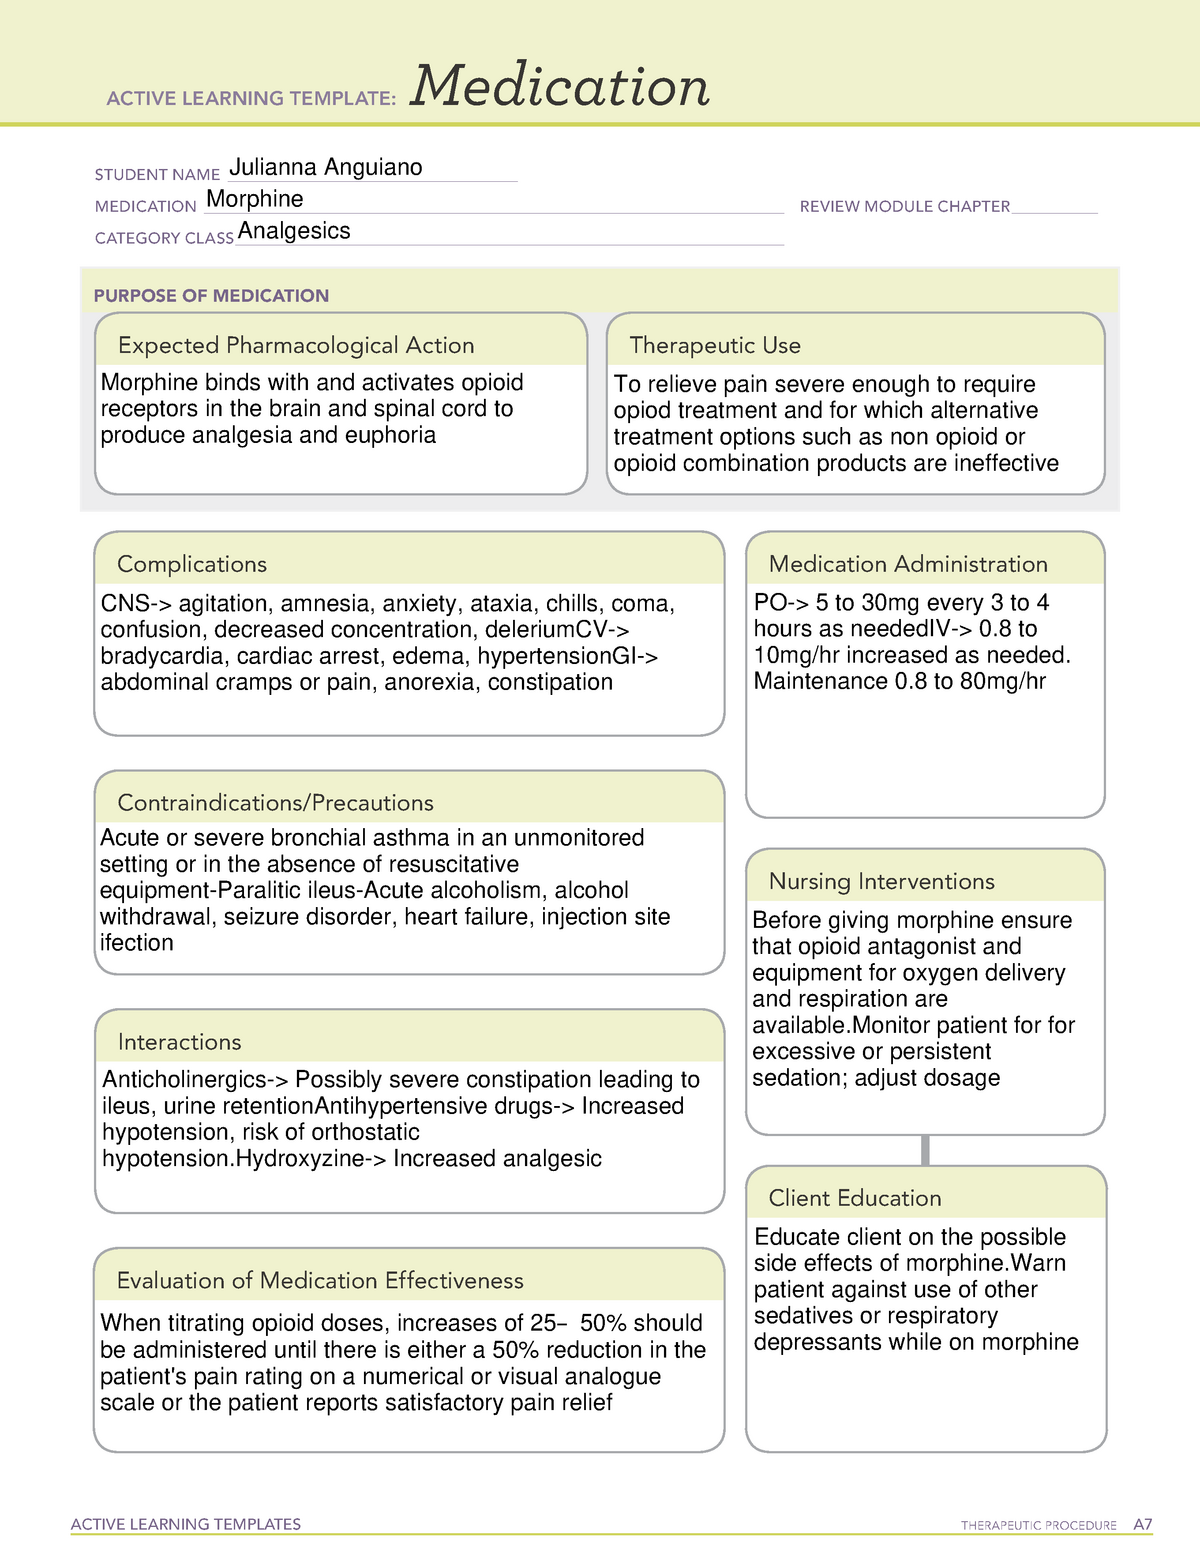 Morphine Medication Administration Template ATI ACTIVE LEARNING TEMPLATES THERAPEUTIC